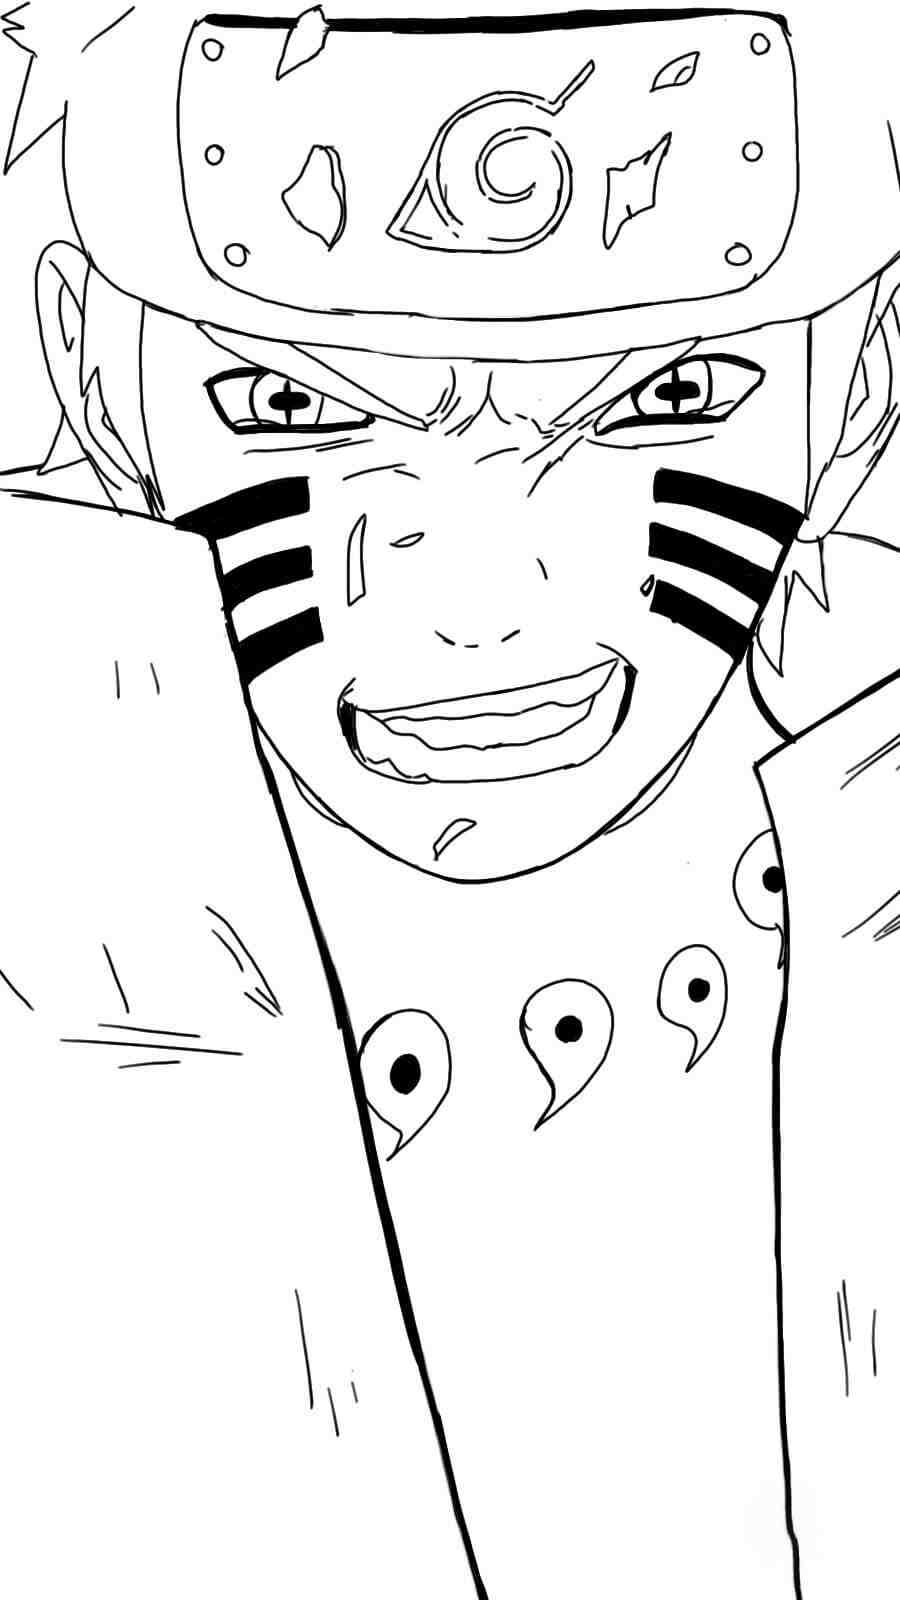 Download Naruto In Six Paths Sage Mode Coloring Pages Cartoons Coloring Pages Coloring Pages For Kids And Adults